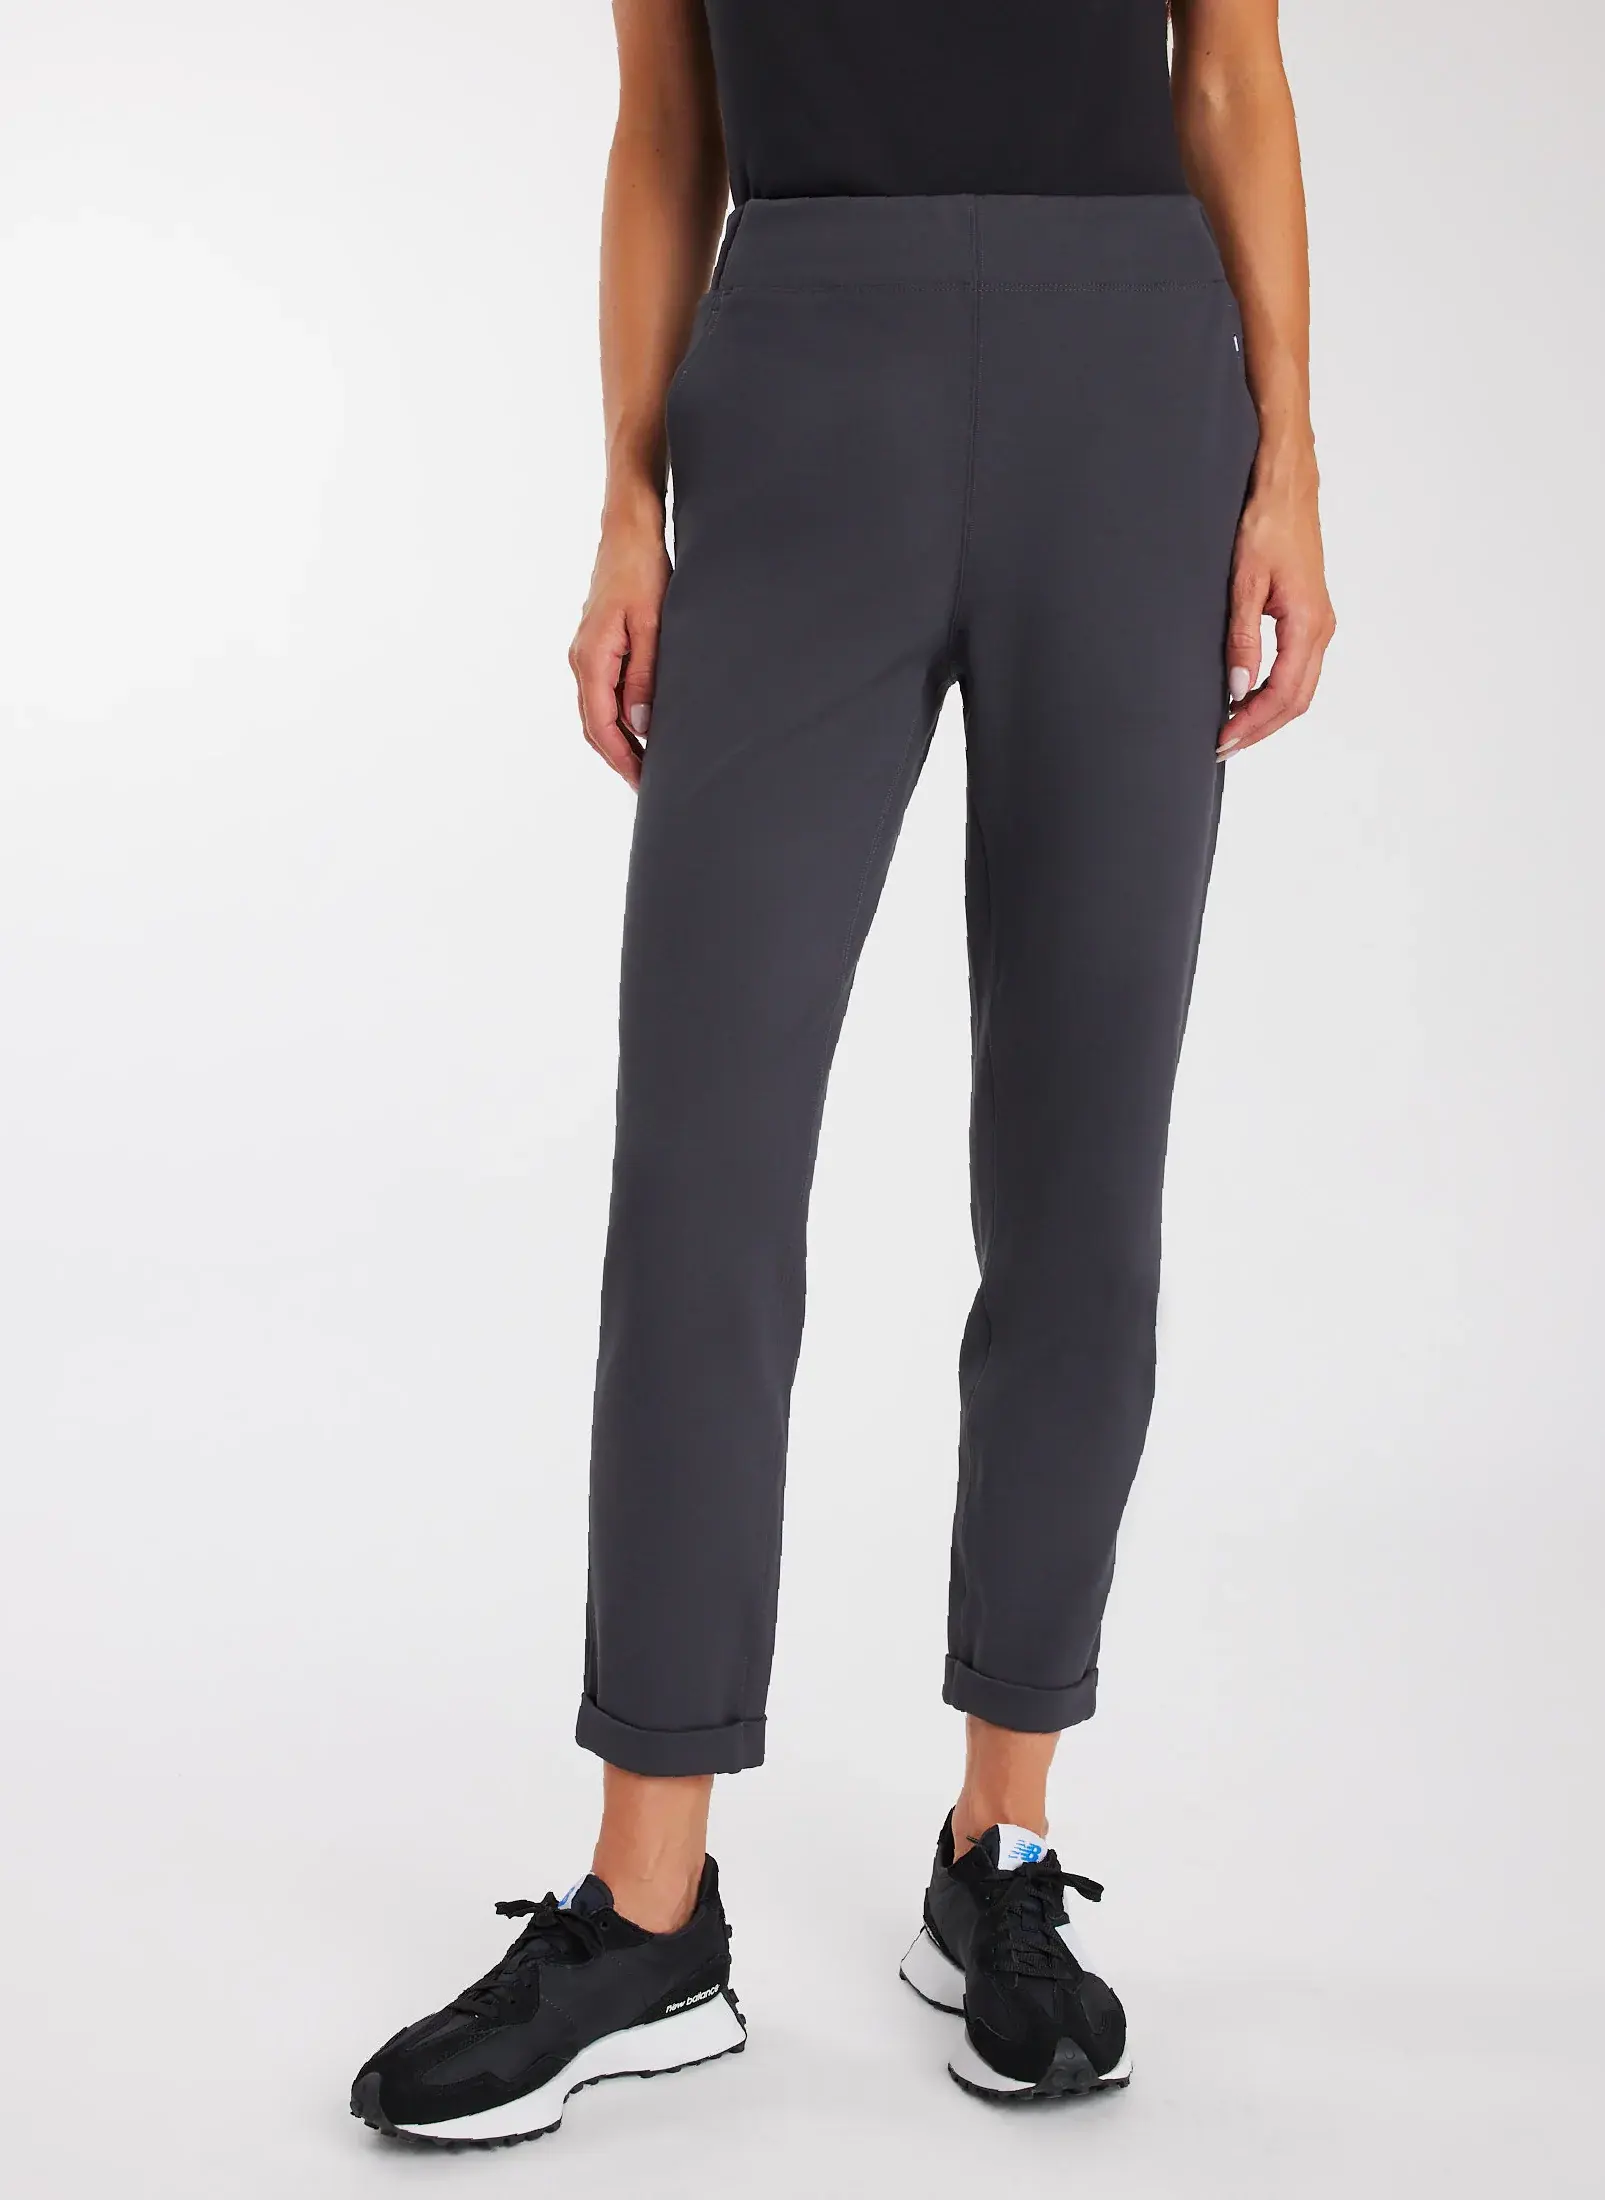 Kit And Ace Serenity Slim Pants. 1